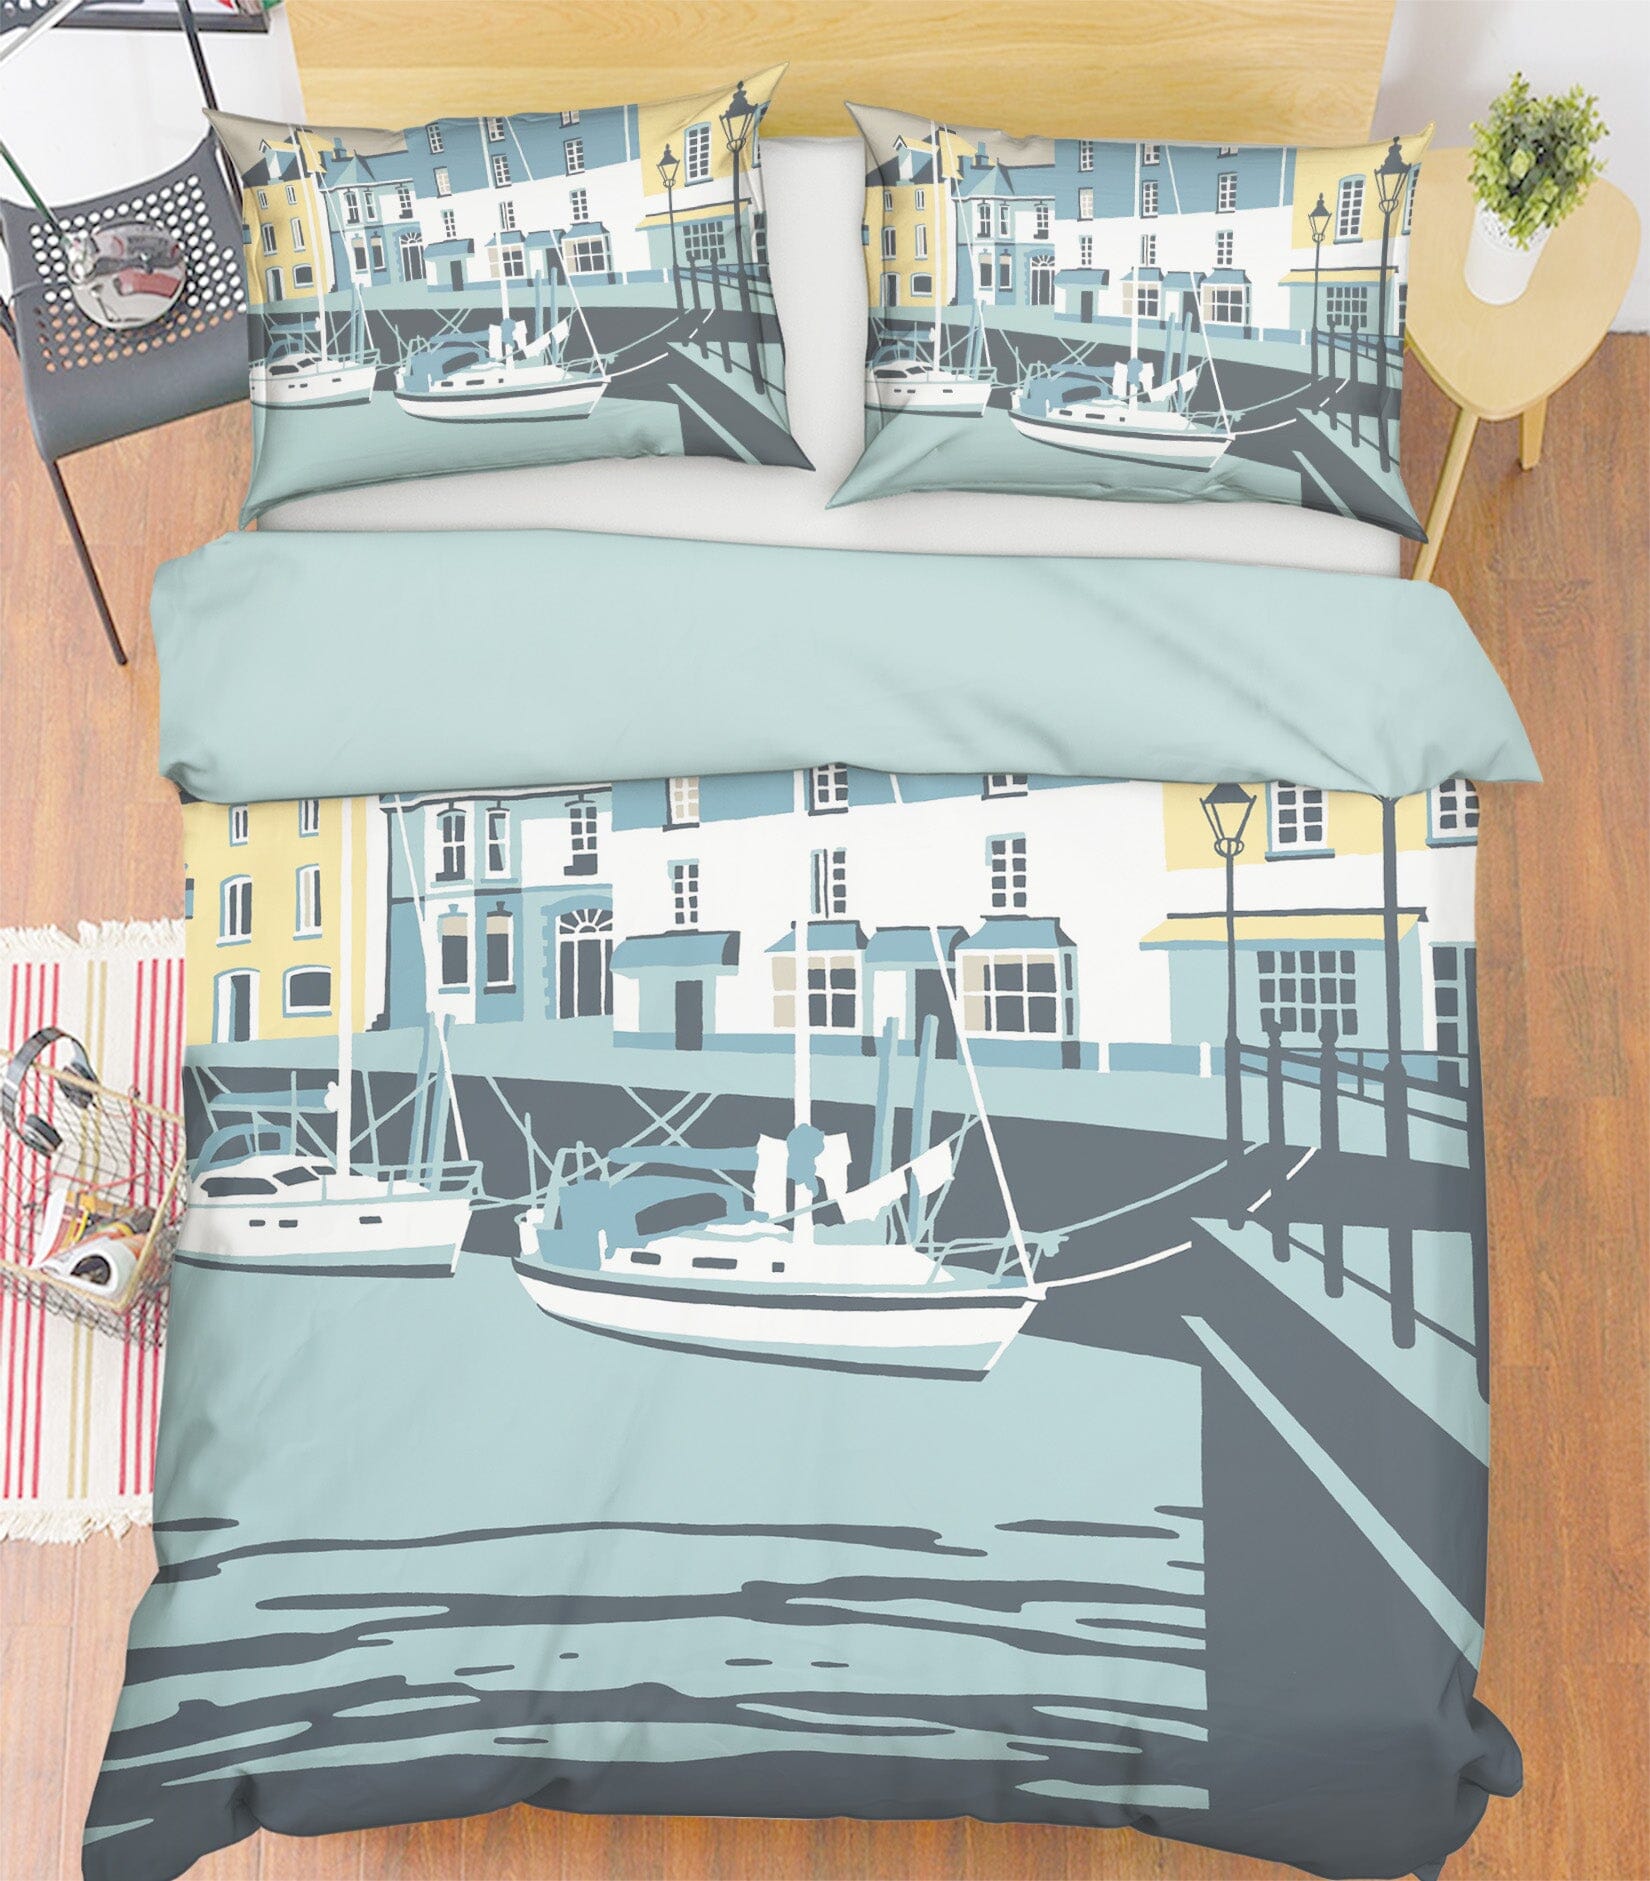 3D Padstow 2035 Steve Read Bedding Bed Pillowcases Quilt Quiet Covers AJ Creativity Home 